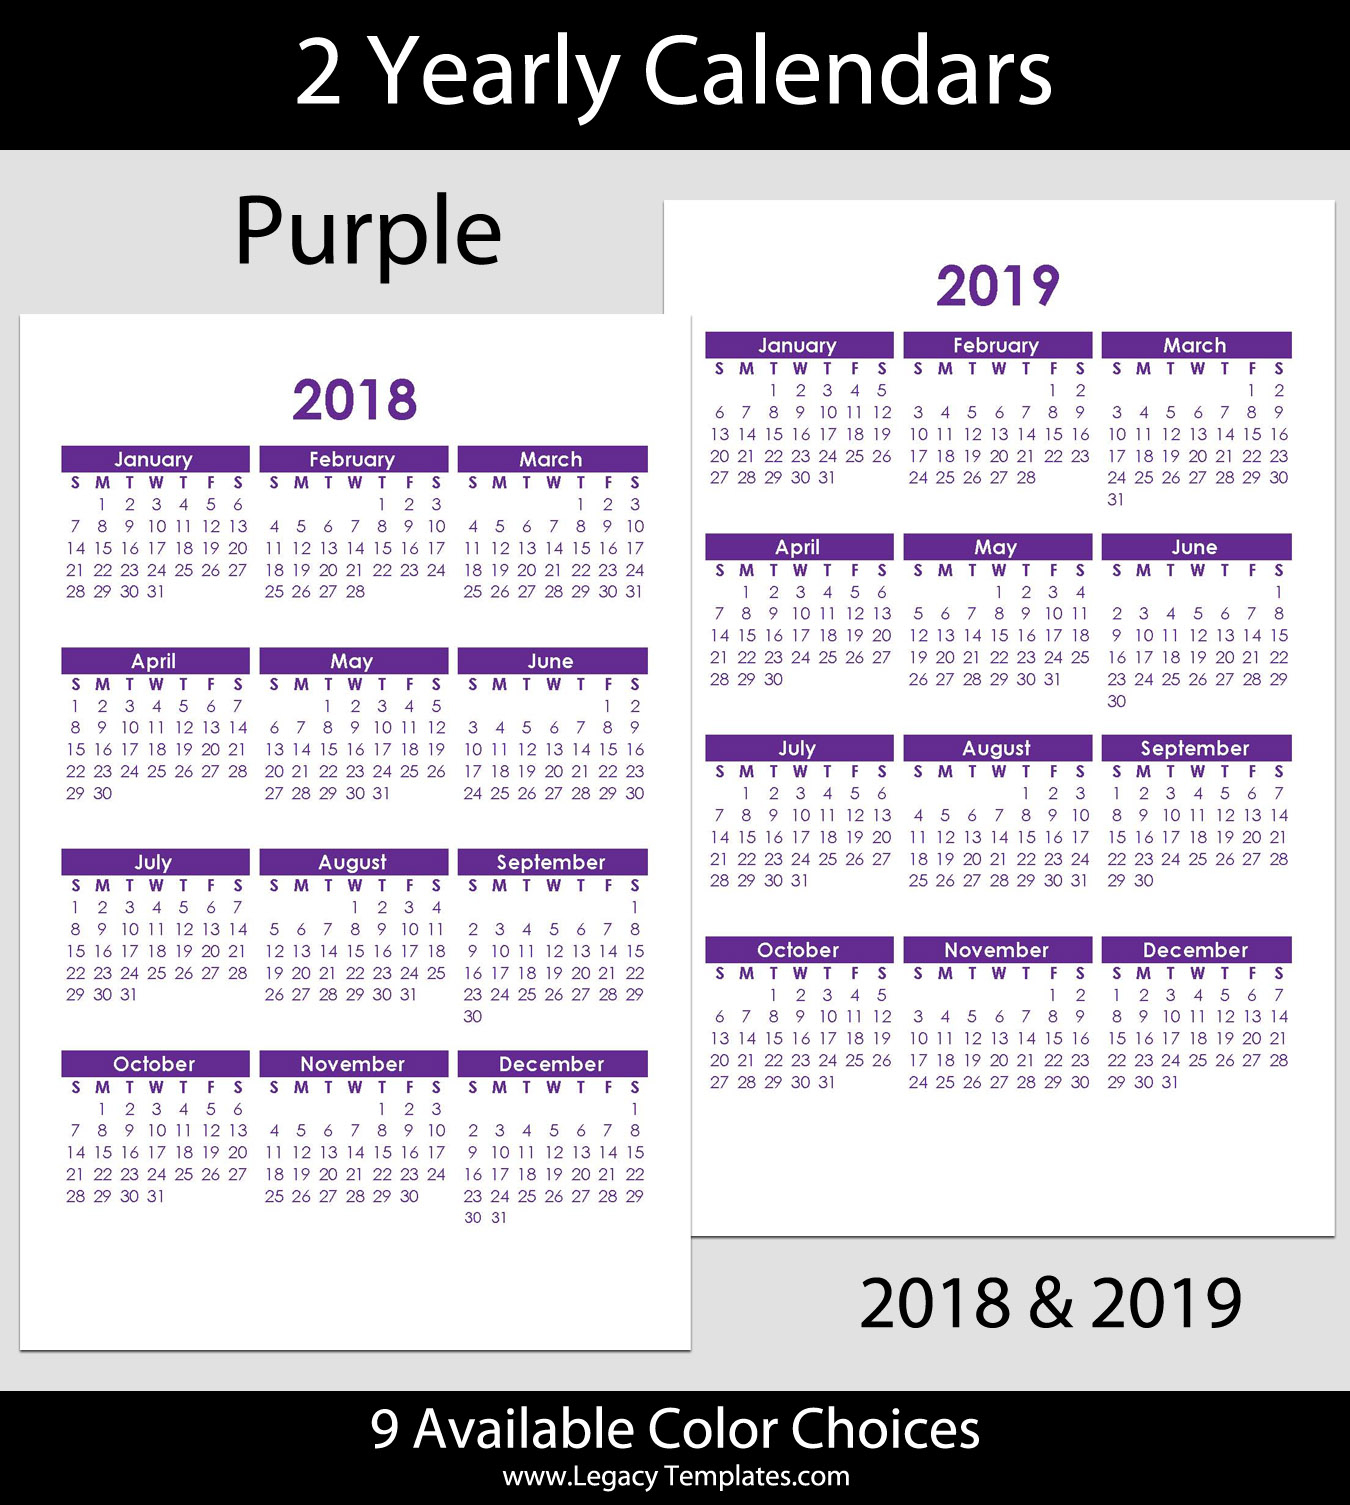 2018 &amp; 2019 Yearly Calendar - 5.5 X 8.5 | Legacy Templates